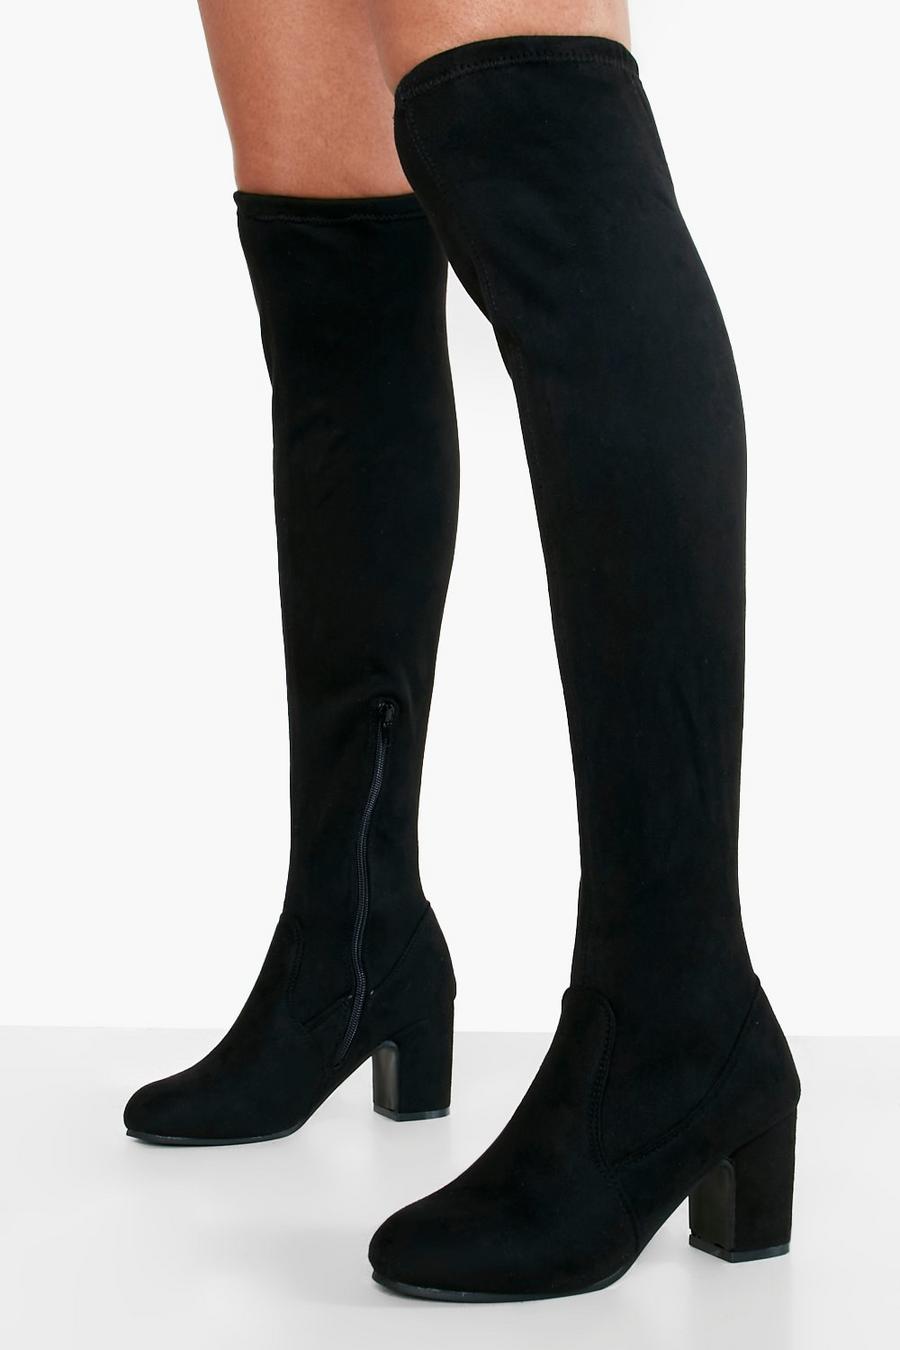 Black negro Wide Fit Block Heel Stretch Over The Knee Boots